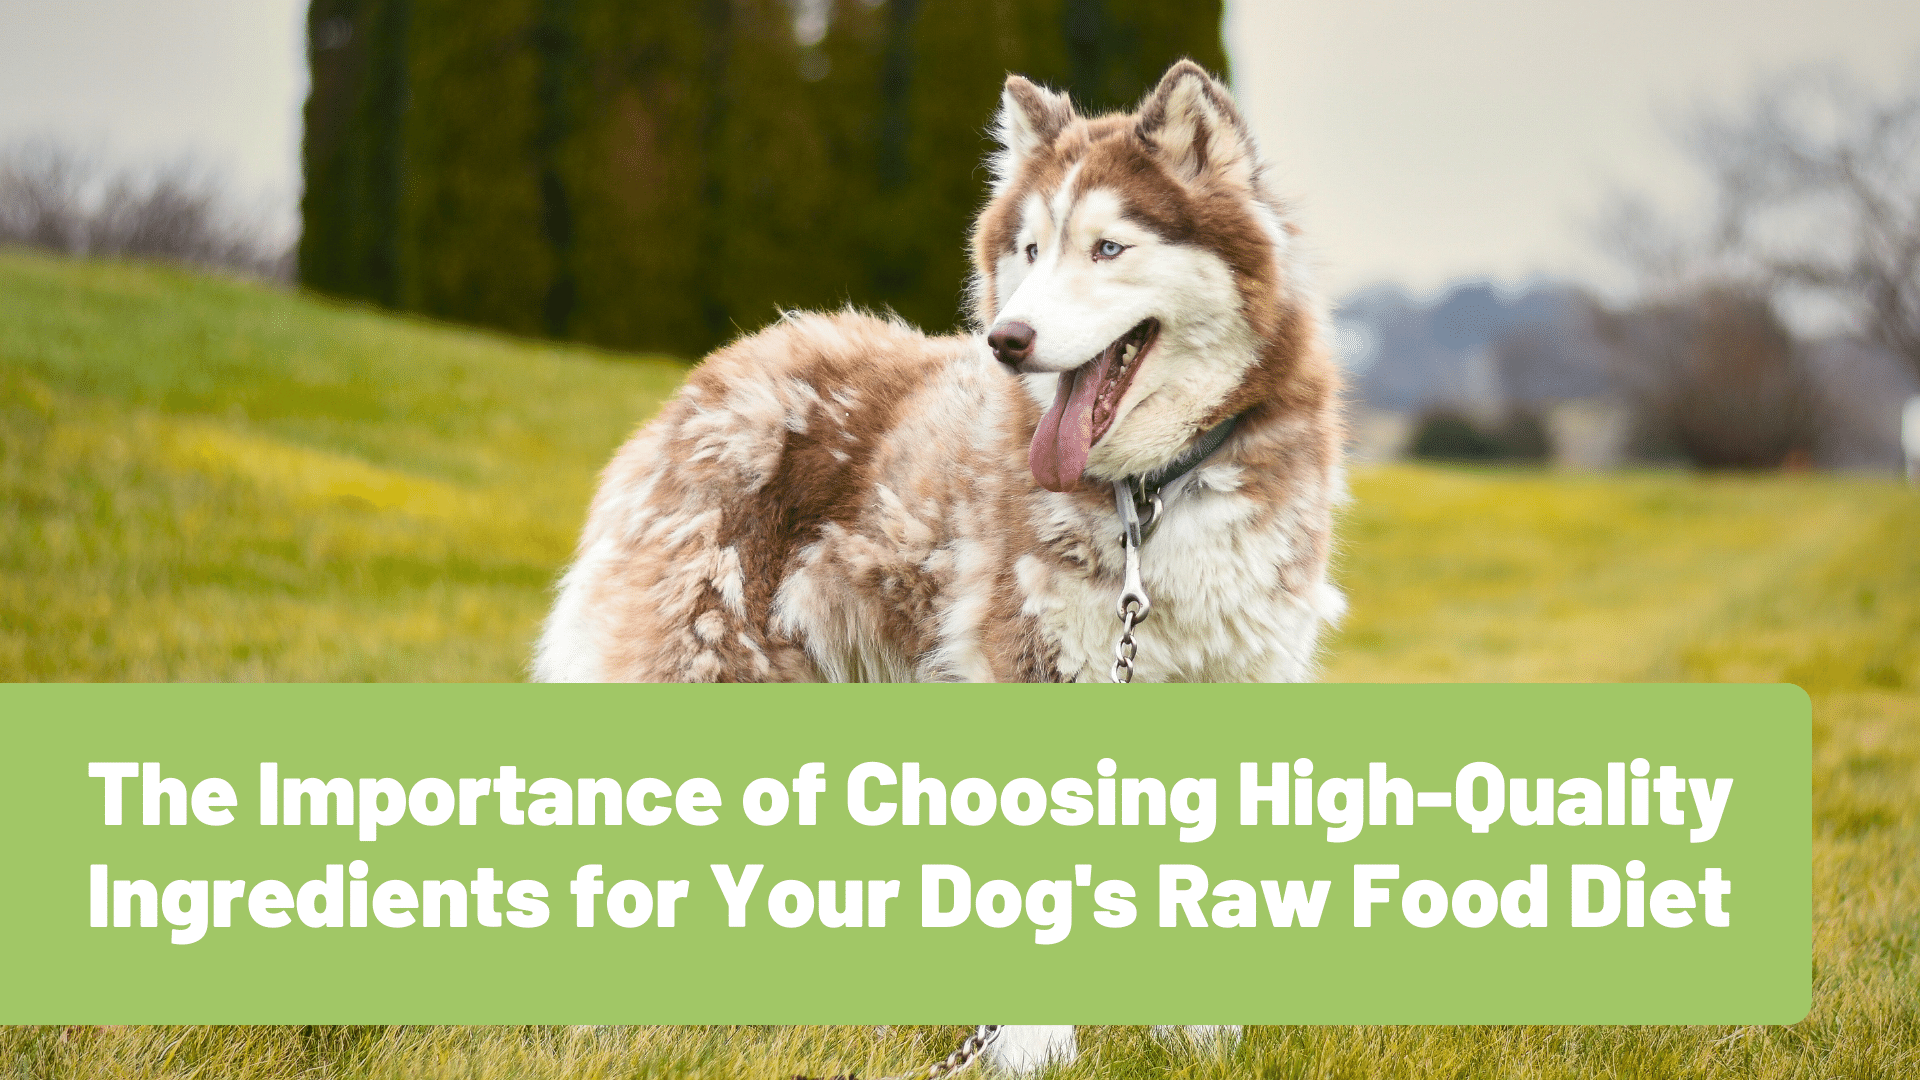 The Importance of Choosing High-Quality Ingredients for Your Dog's Raw Food Diet - RawOrigins.Pet - The Raw Dog Food Comapny